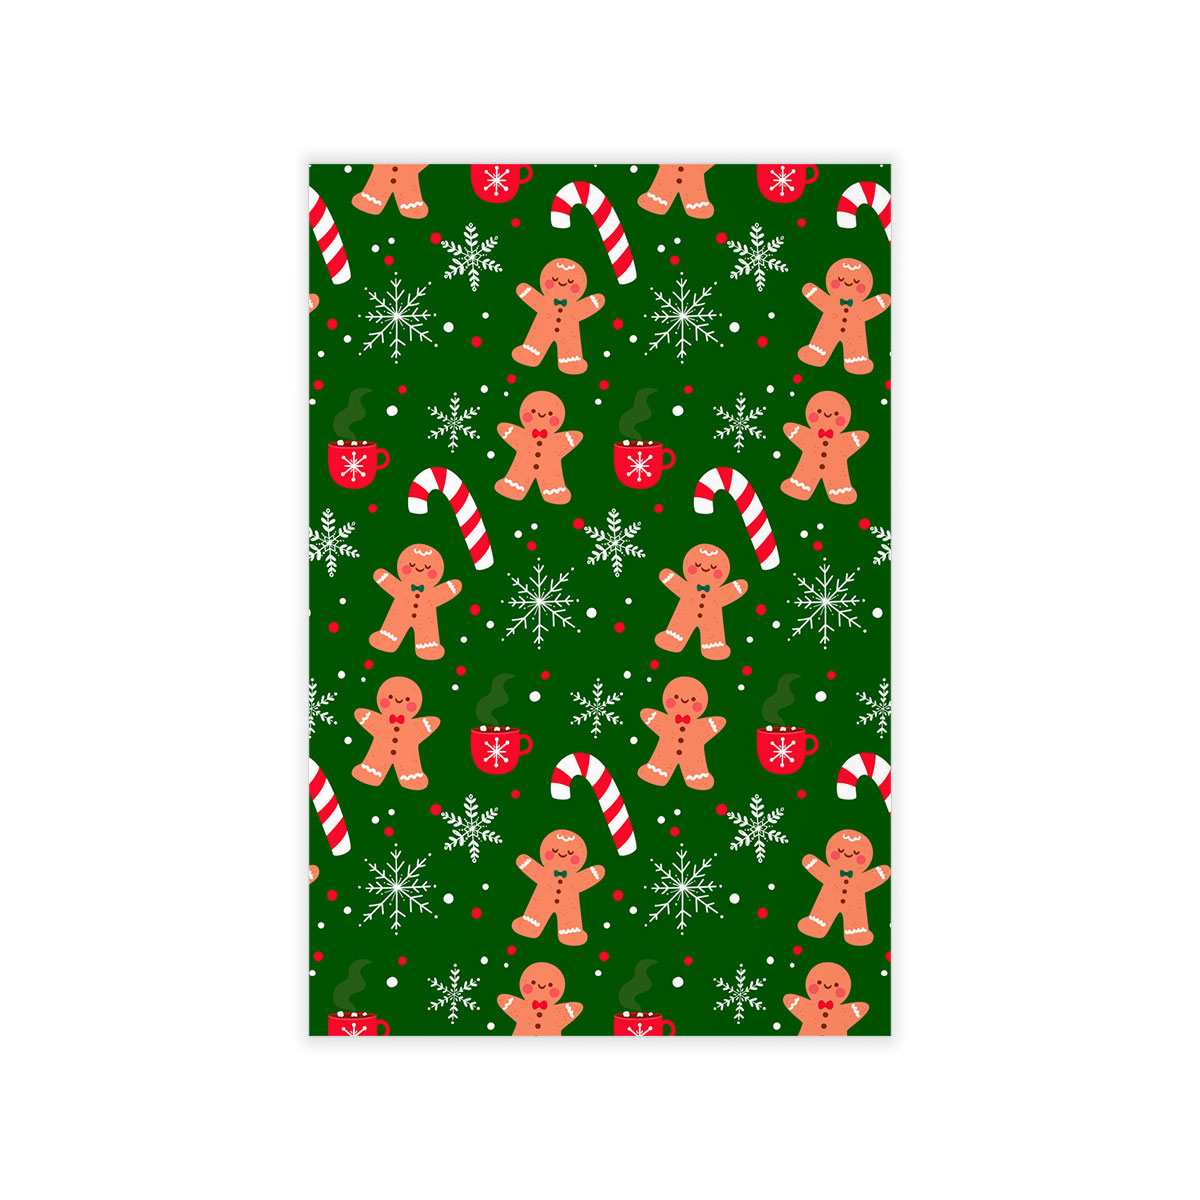 Red Green And White Gingerbread Man, Candy Cane With Snowflake Wall Decals